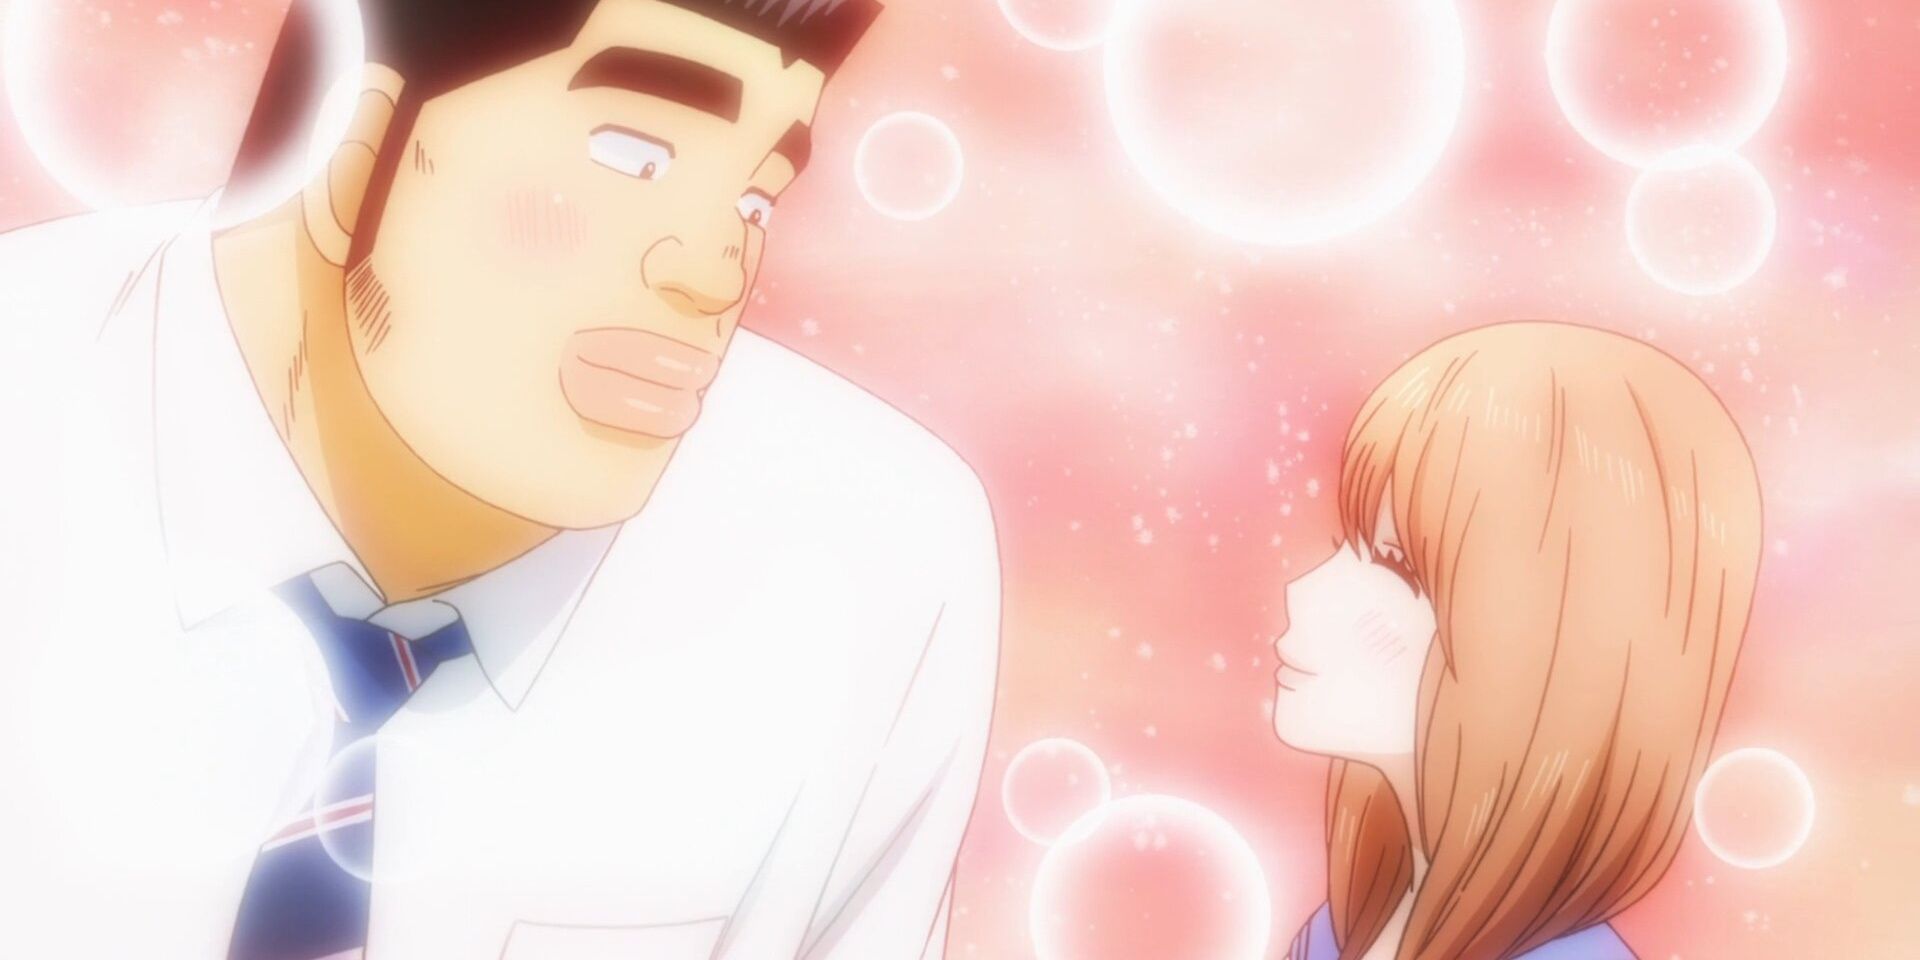 Takeo and Rinko from My Love Story looking at each other and smiling.